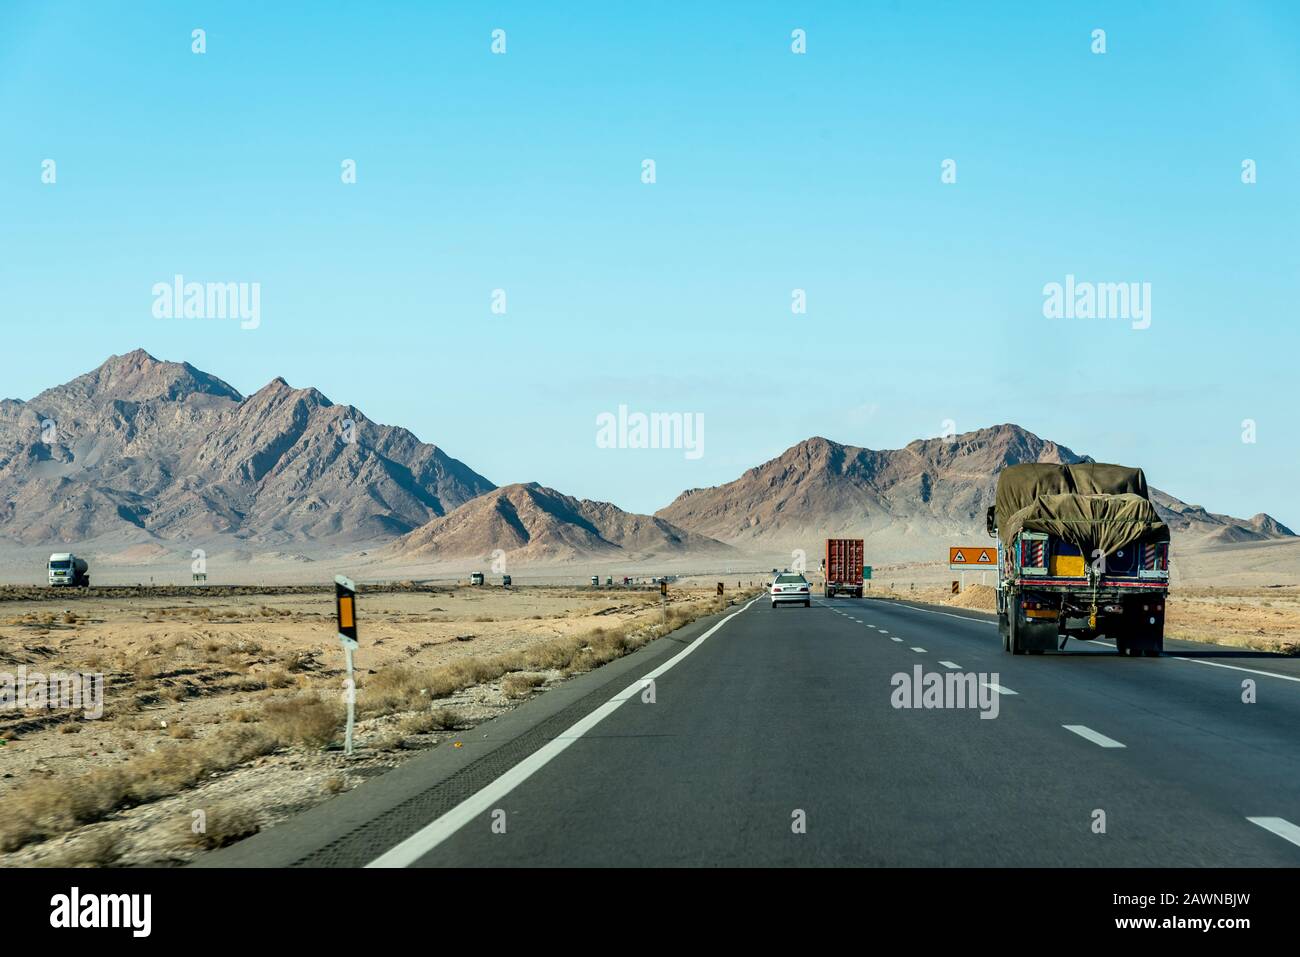 Road view with private cars and trucks between Kerman and Yazd, Iran Stock Photo